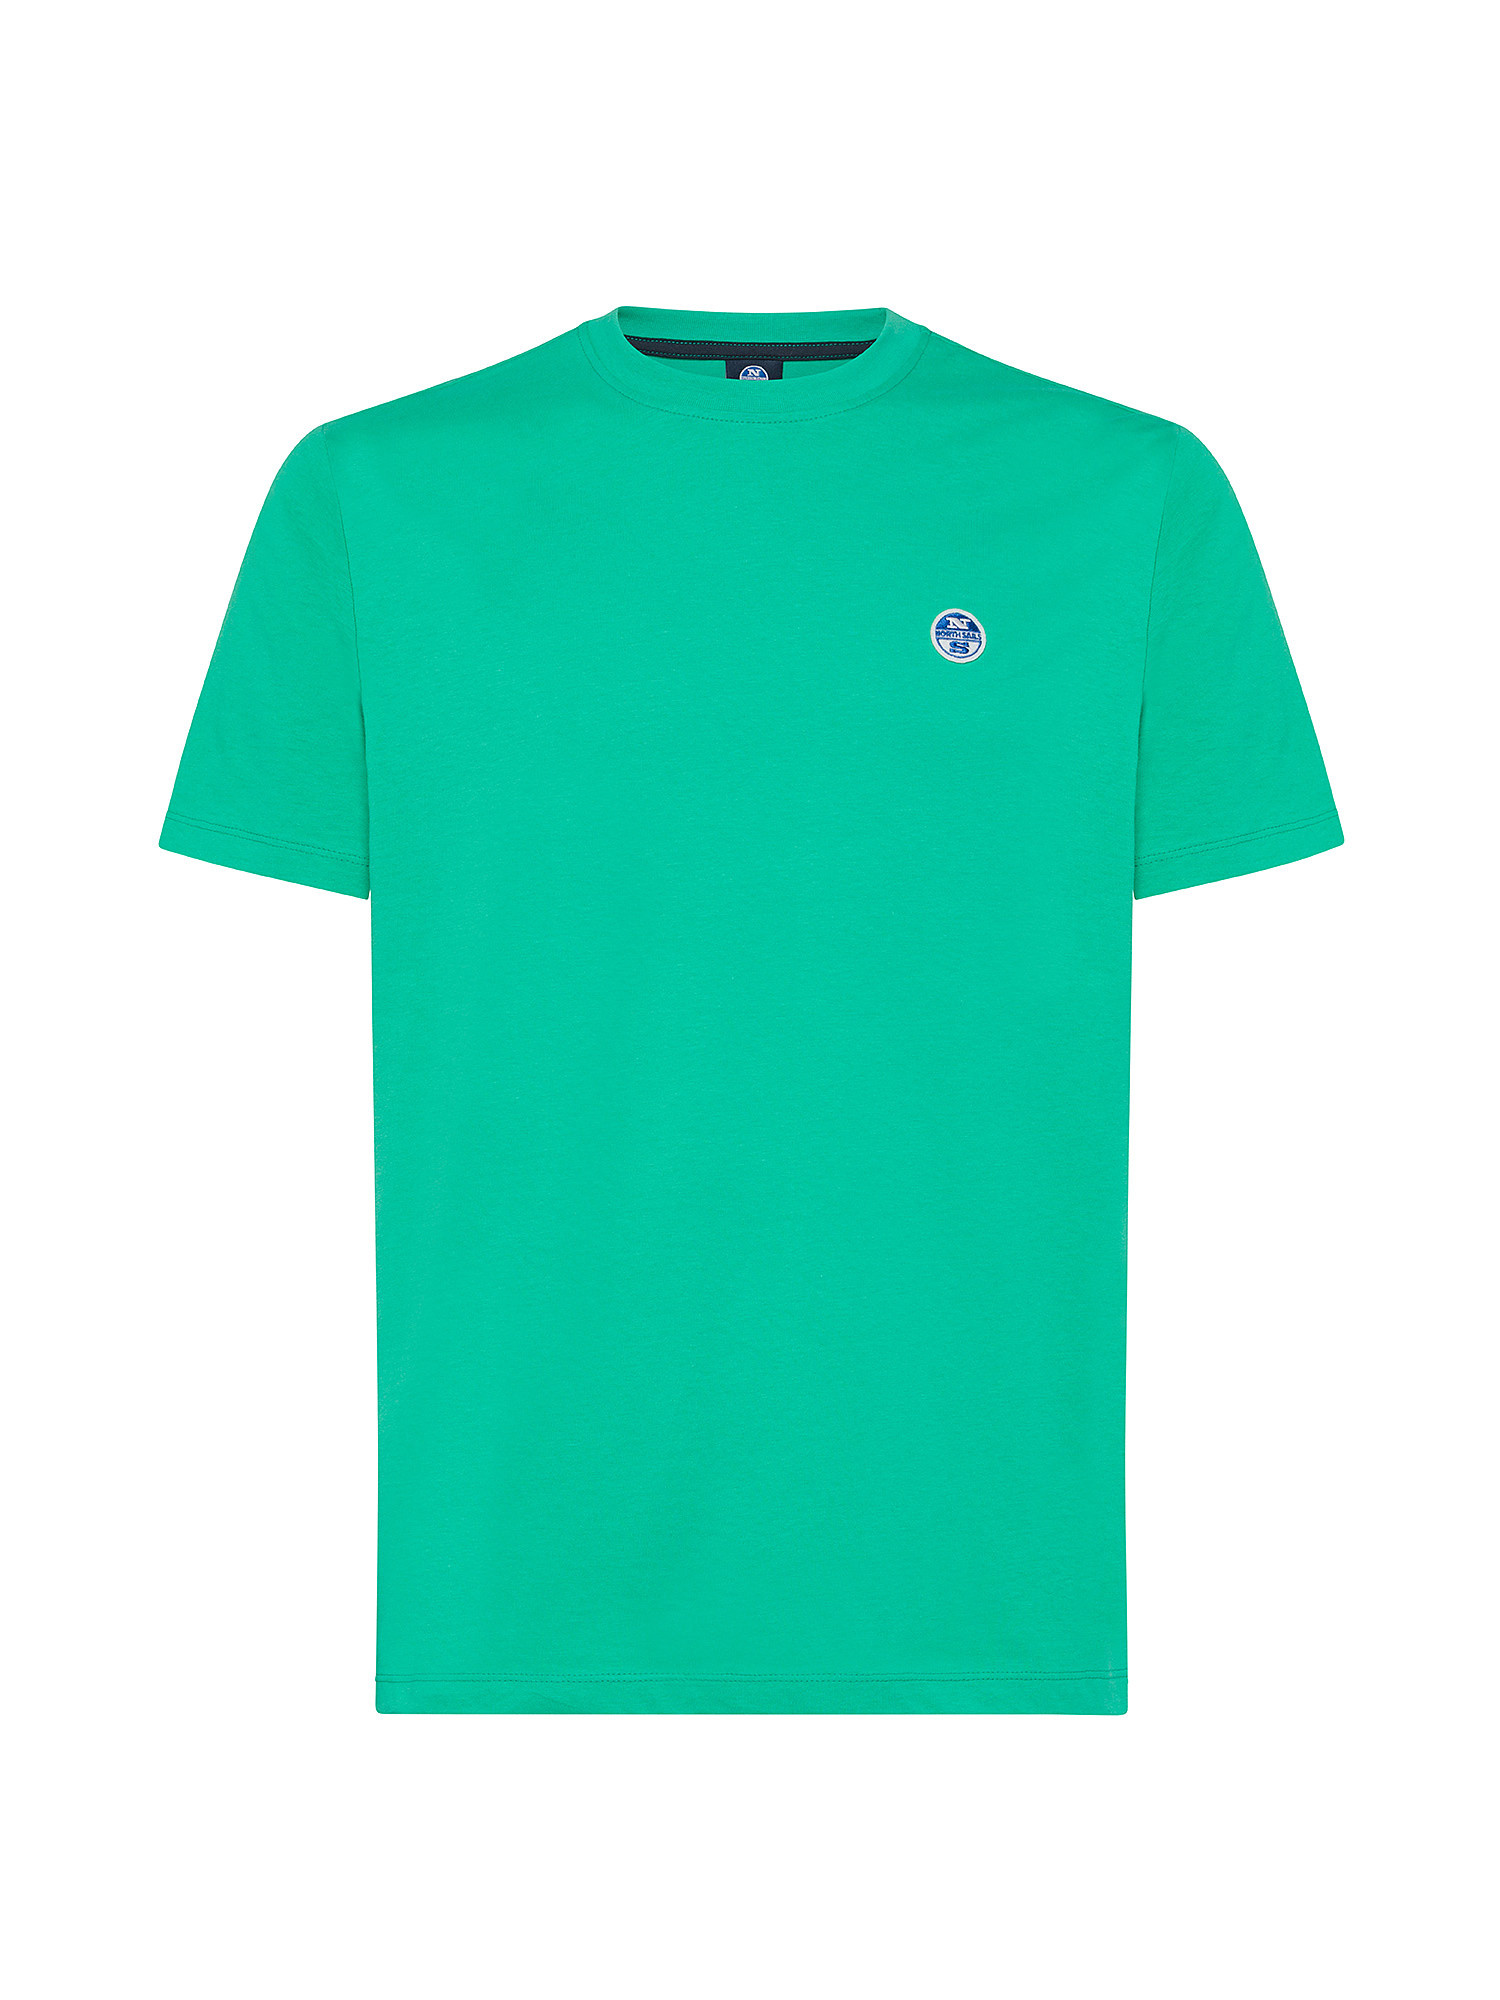 North Sails - T-shirt in jersey di cotone organico con micrologo, Verde, large image number 0